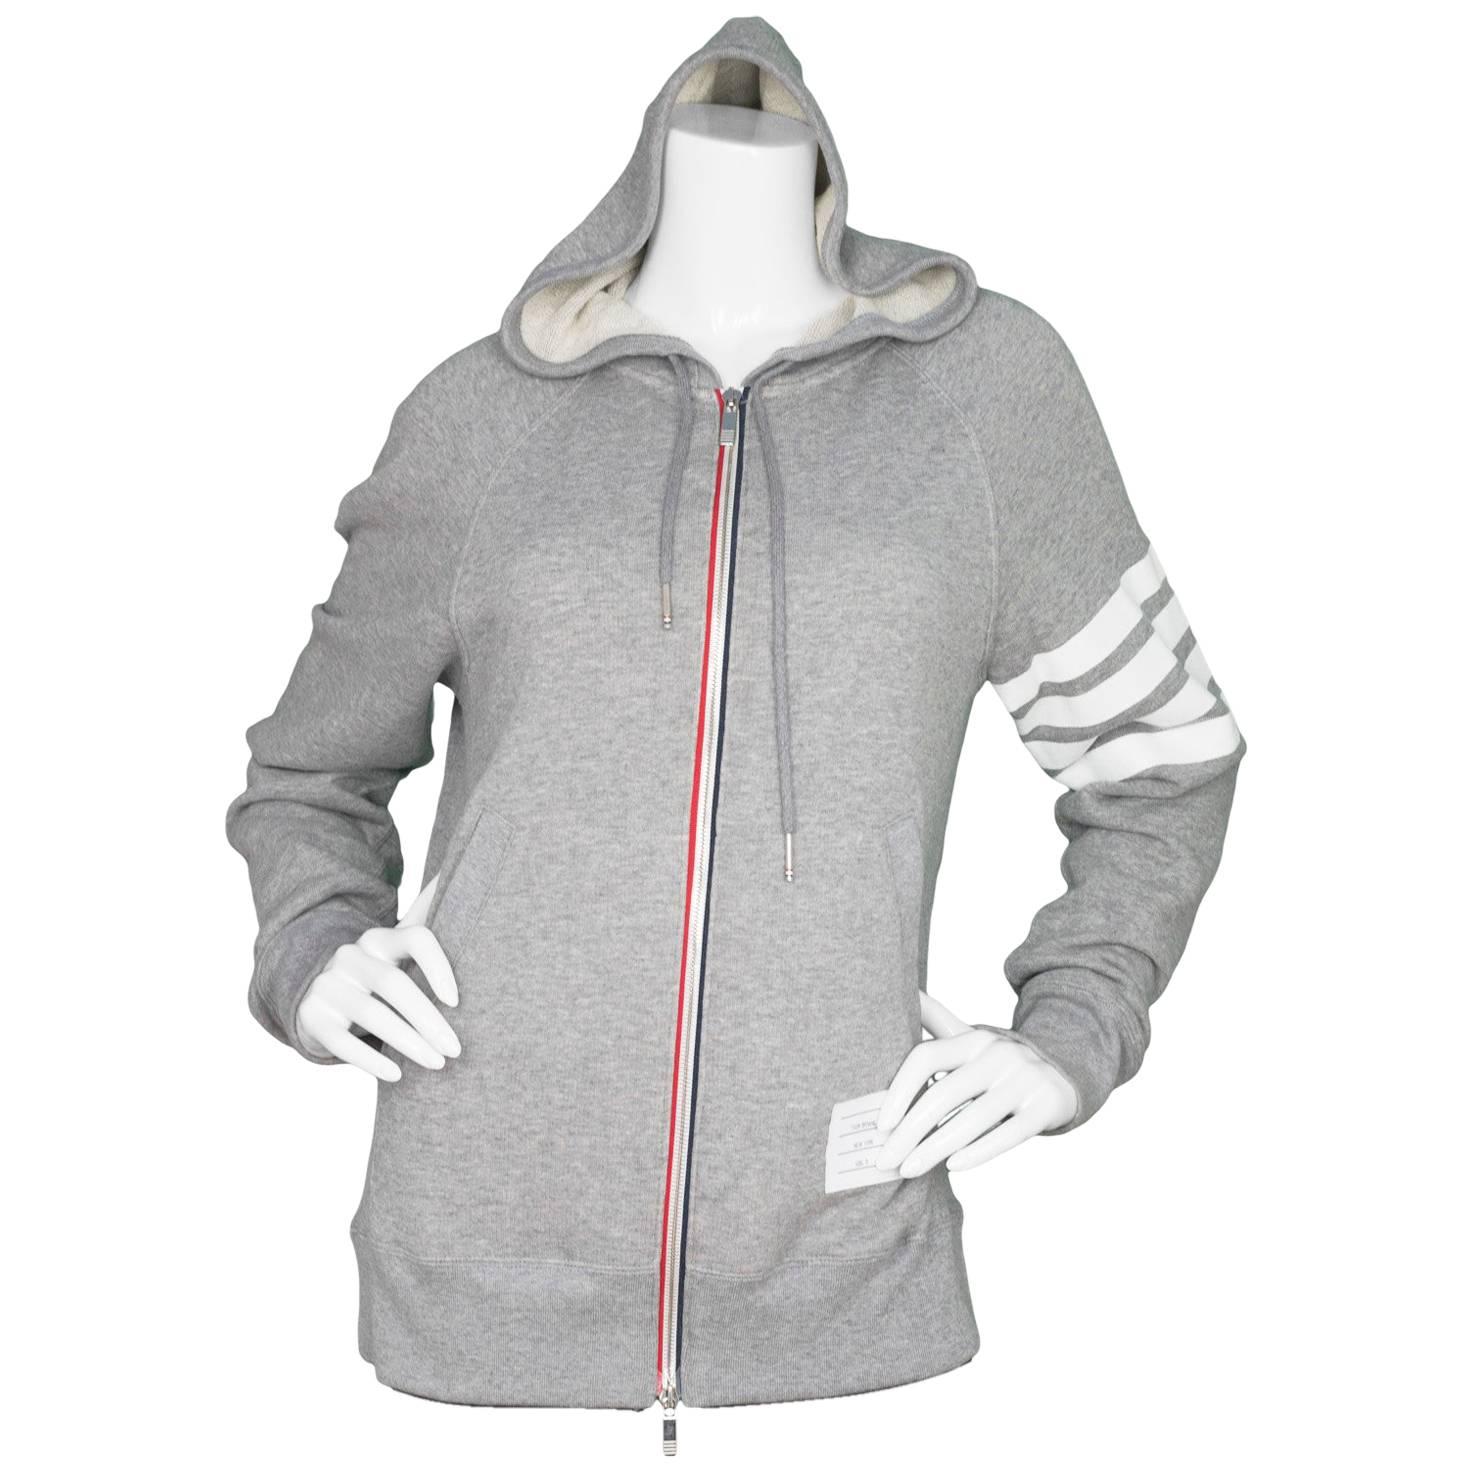 Thom Browne Men's Grey Block Stripe Cotton Zip Up Hoodie 

Made In: Japan
Color: Grey 
Composition: 100% cotton
Lining: Grey, 100% cotton
Closure/Opening: Zip up front
Exterior Pockets: Two hip pockets
Interior Pockets: None
Retail Price: $725 +